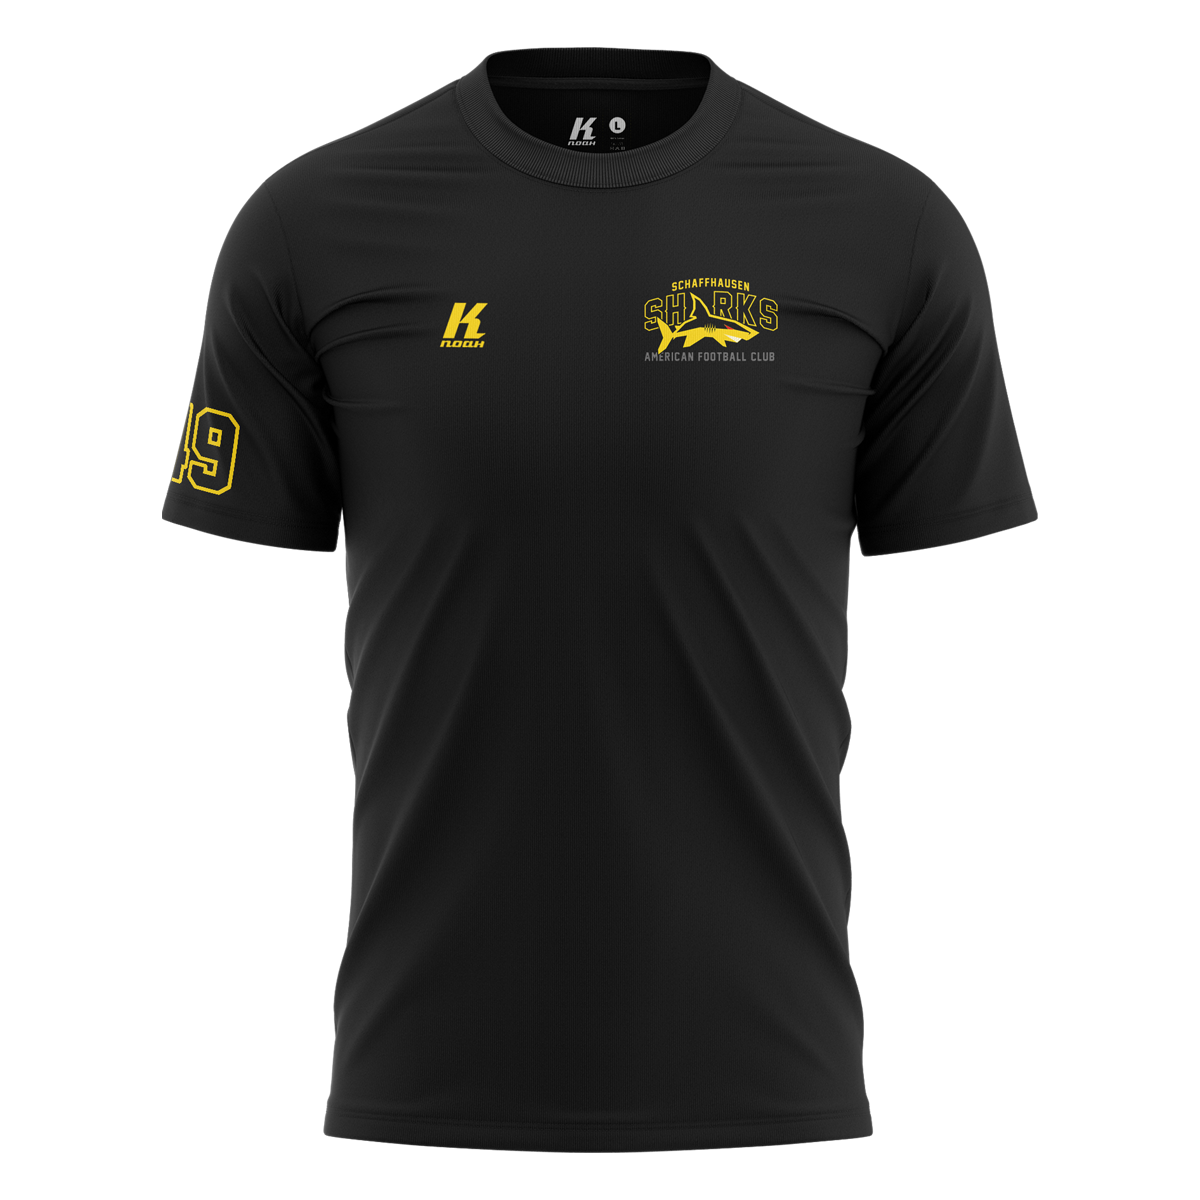 Sharks Basic Tee Primary with Playernumber/Initials